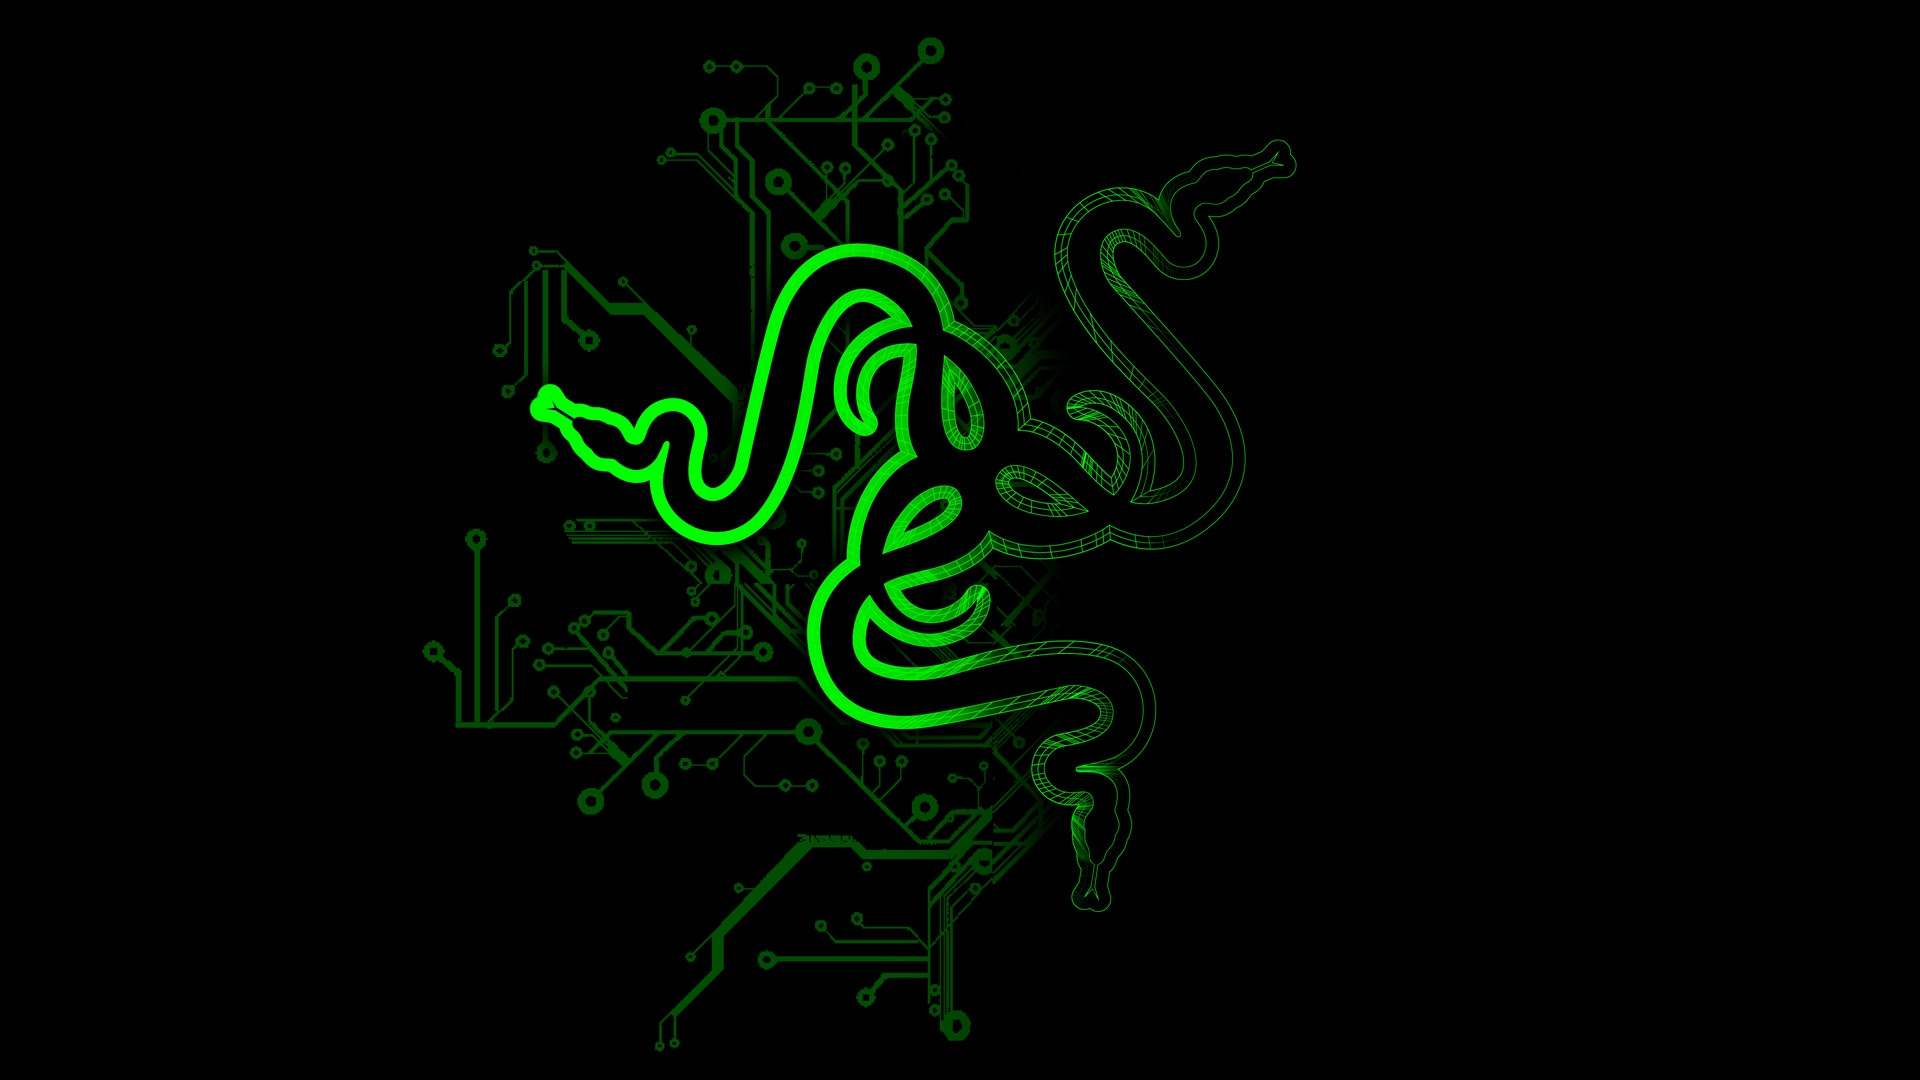 Mine are razer desktop wallpapers the first one for my laptop the